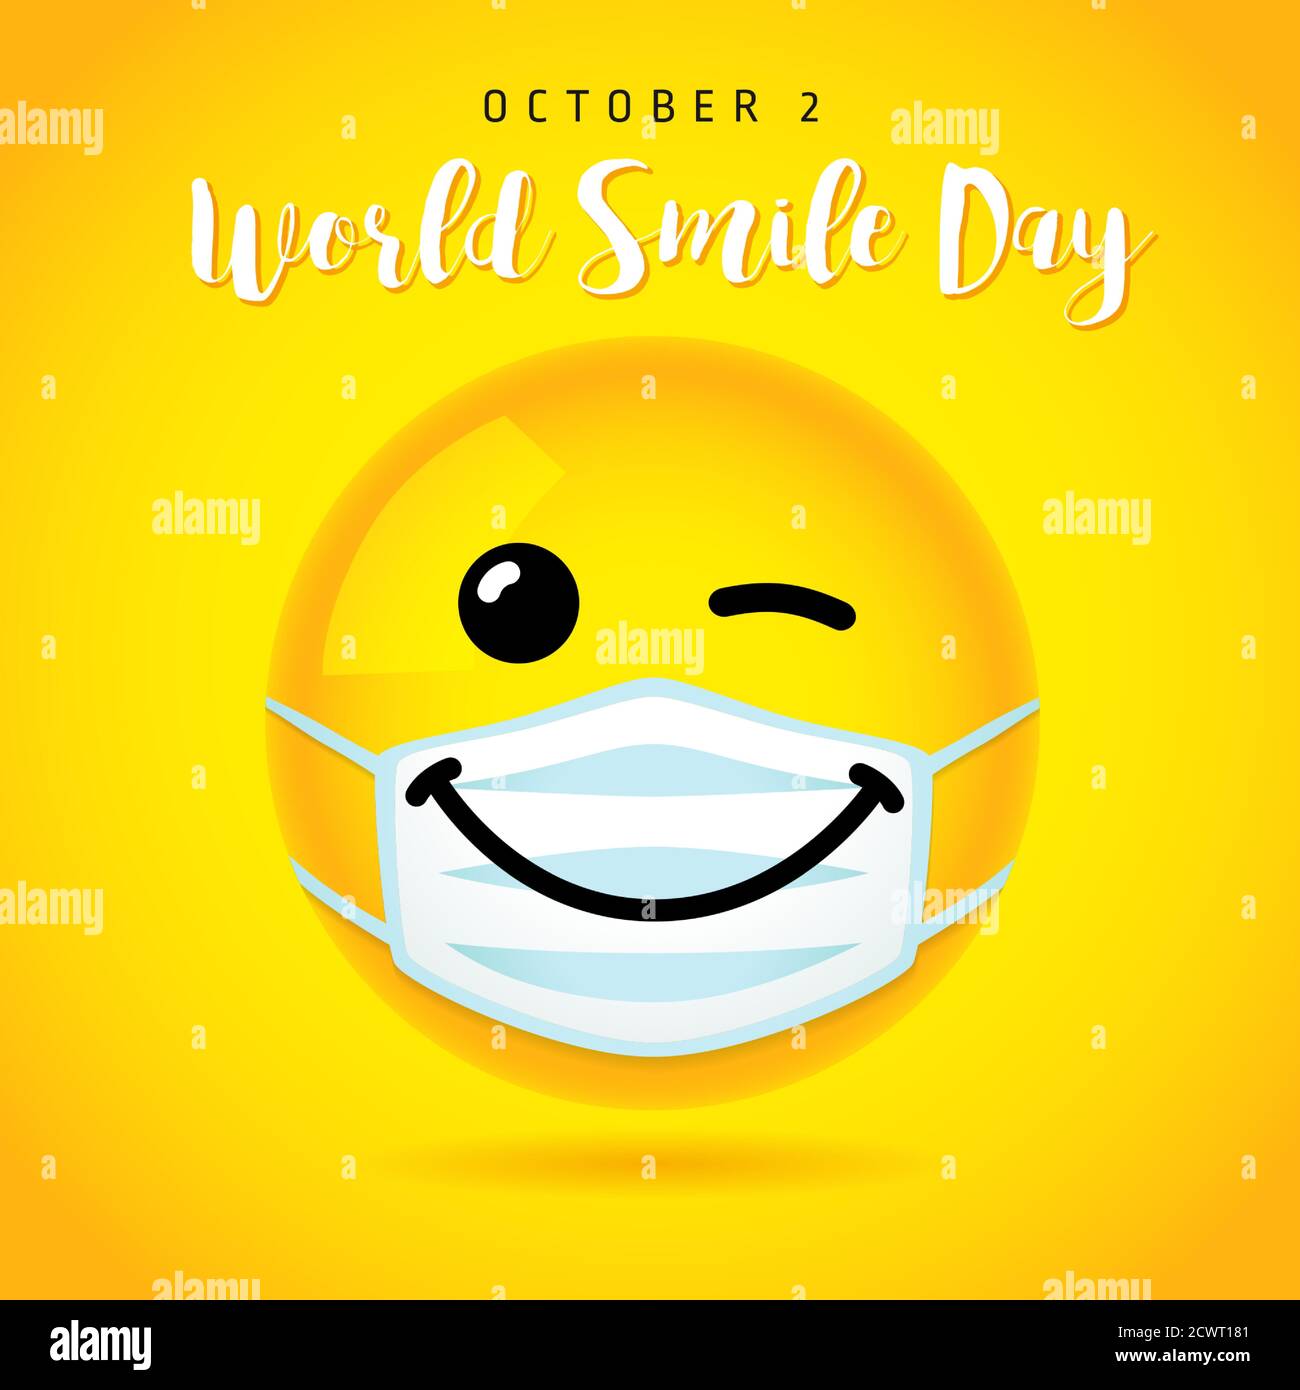 World Smile Day wink banner template, October 2. Happy yellow smiling icon in medical mask and text. Vector emoticon on yellow background design Stock Vector